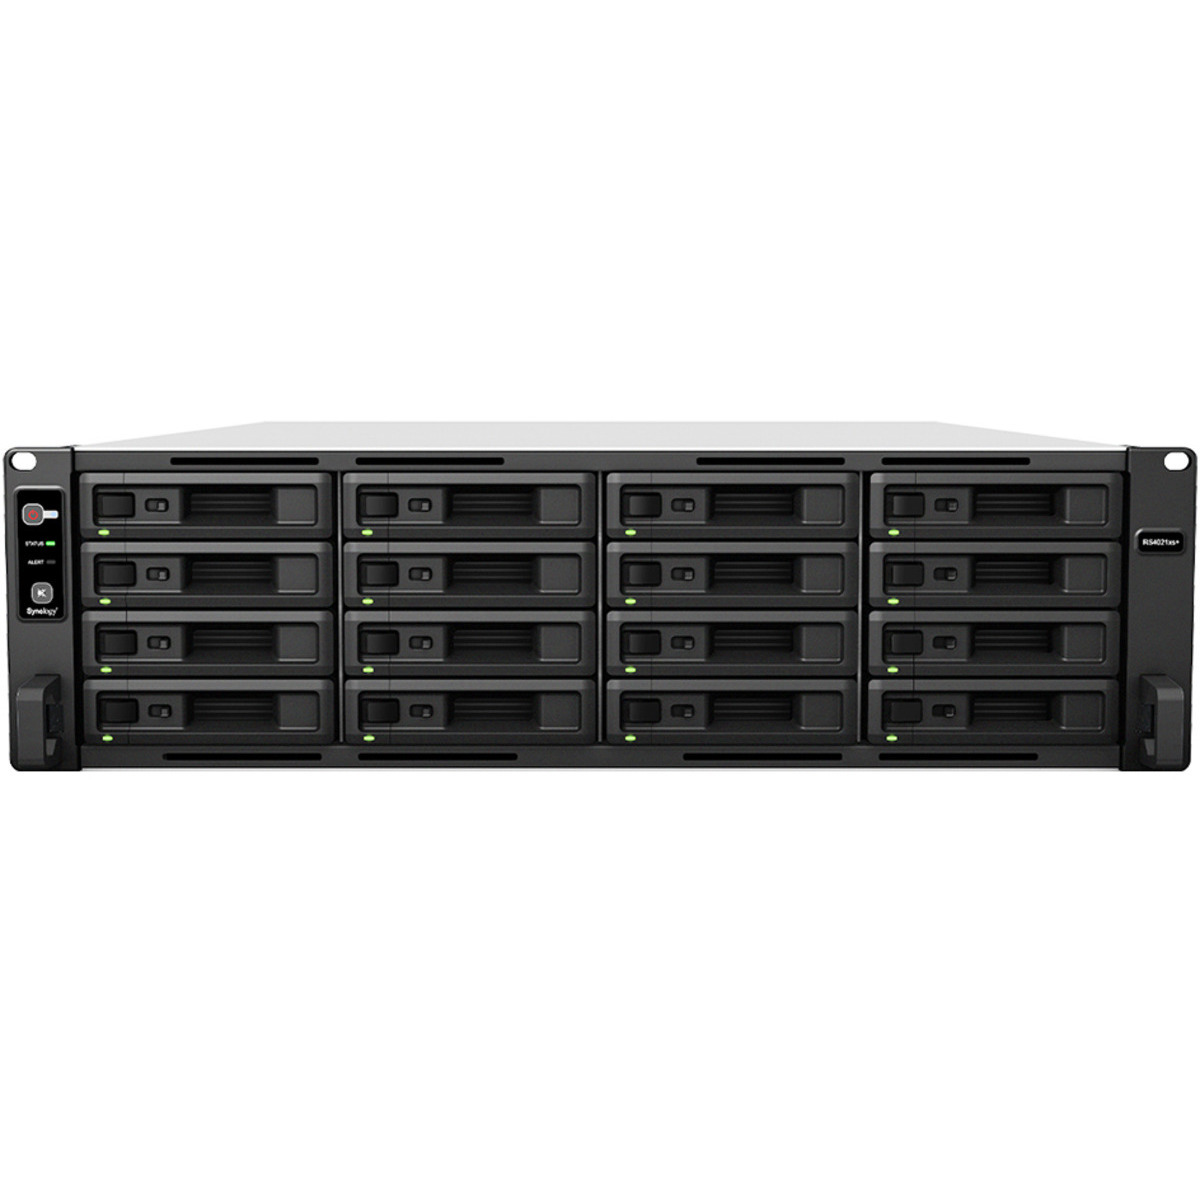 Synology RackStation RS4021xs+ 22tb 16-Bay RackMount Large Business / Enterprise NAS - Network Attached Storage Device 11x2tb Western Digital Red SA500 WDS200T1R0A 2.5 560/530MB/s SATA 6Gb/s SSD NAS Class Drives Installed - Burn-In Tested RackStation RS4021xs+